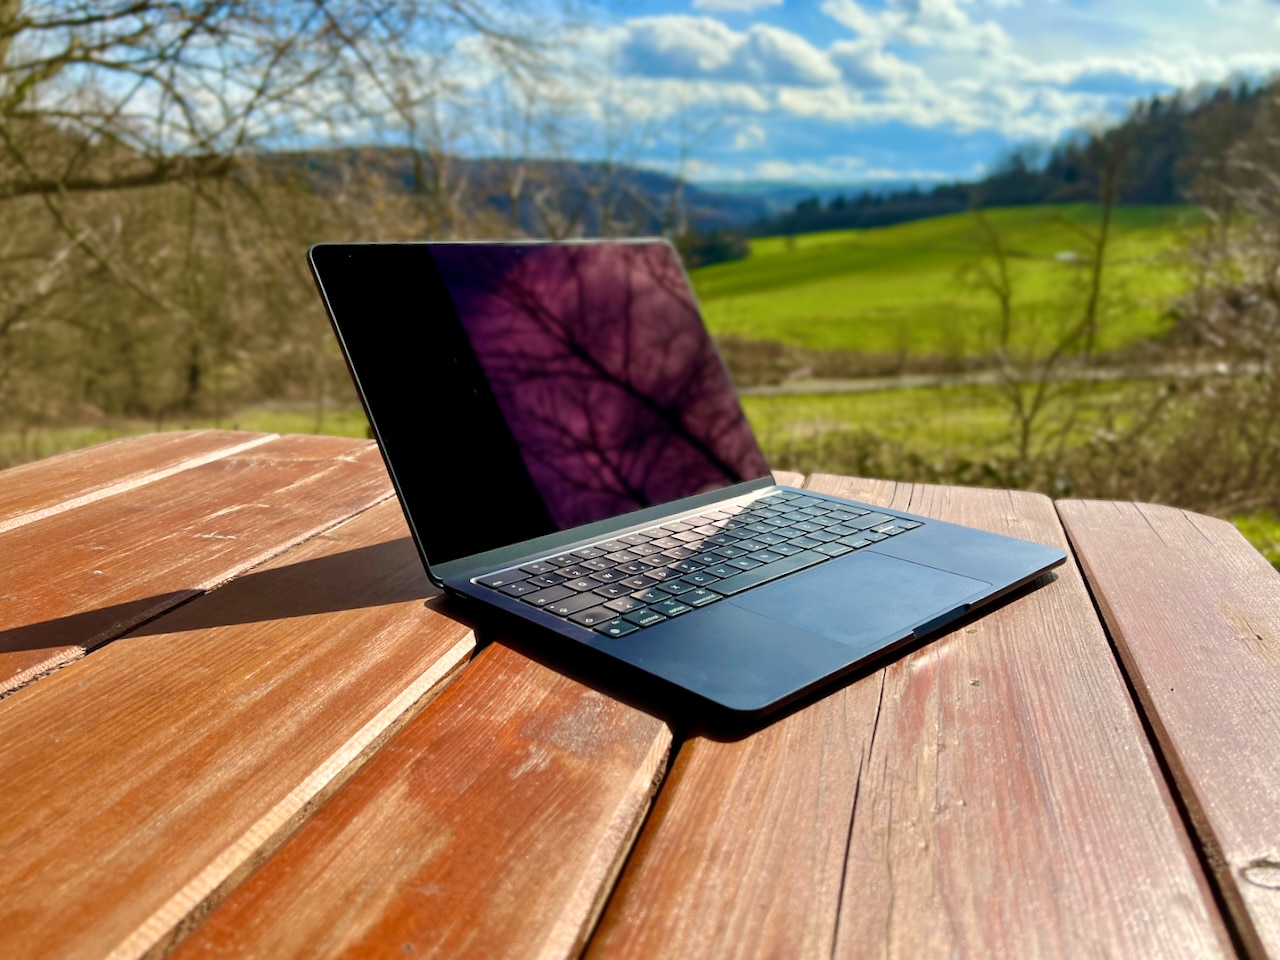 Working on the go with MacBook, iPhone and iPad – seamless workflows in the outdoor office?